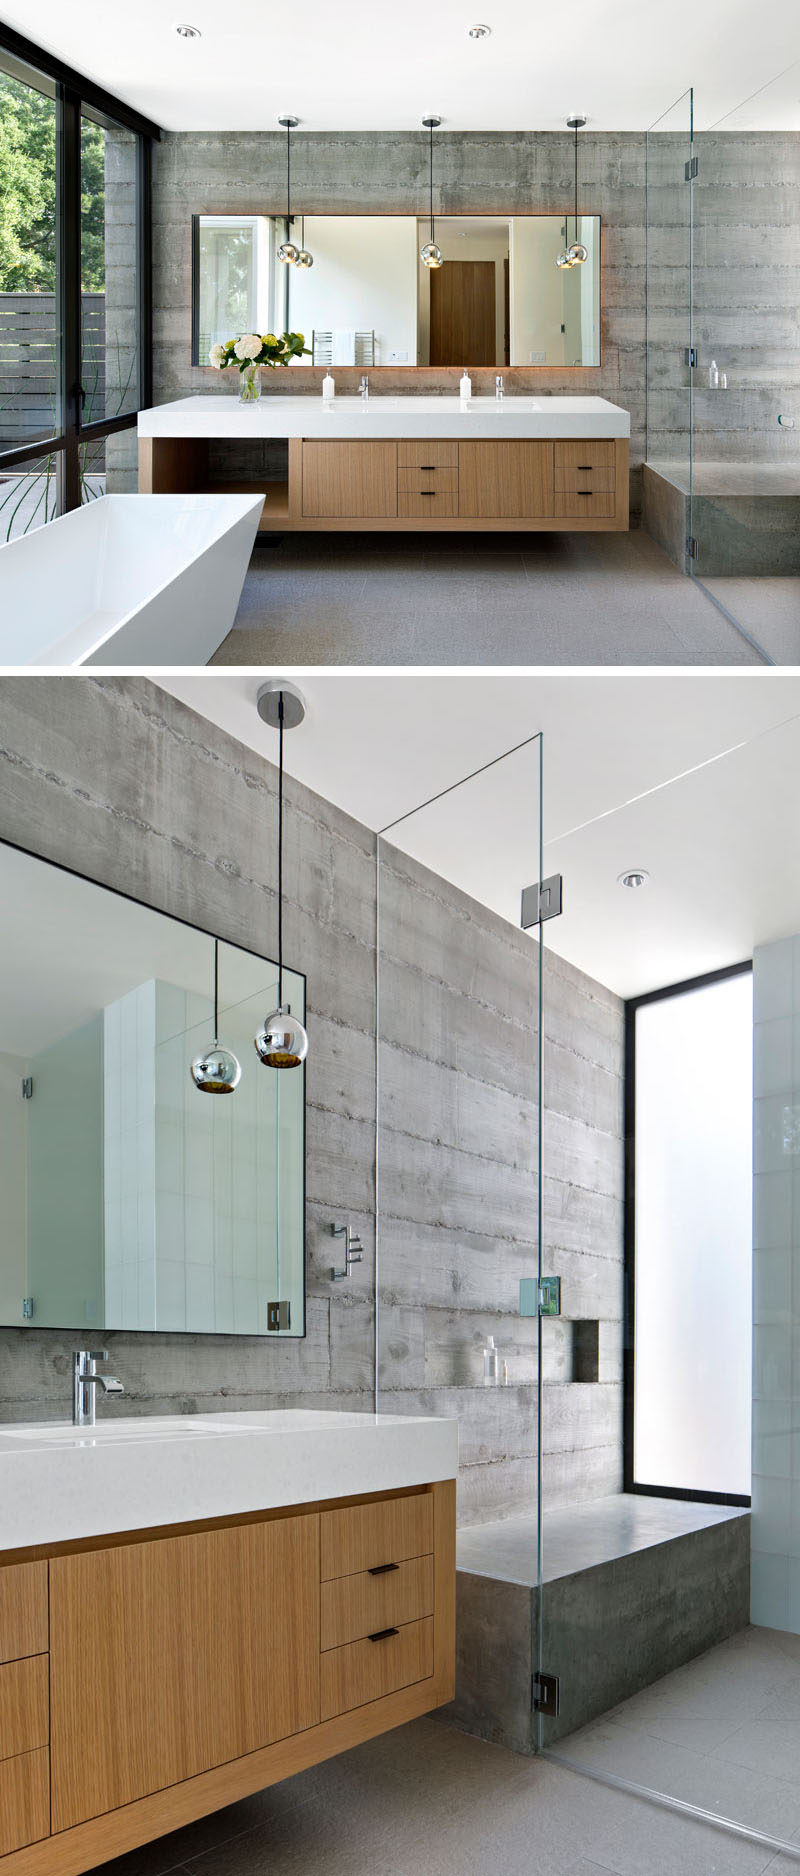 In this modern bathroom, the concrete walls and details, like the white standalone tub, floating double vanity with ample storage, and large backlit mirror, give the bathroom a contemporary feel while at the same time give it a warm and inviting look. In the shower, there's a large concrete bench to match the concrete walls, and a glass shower screen keeps the vanity dry.